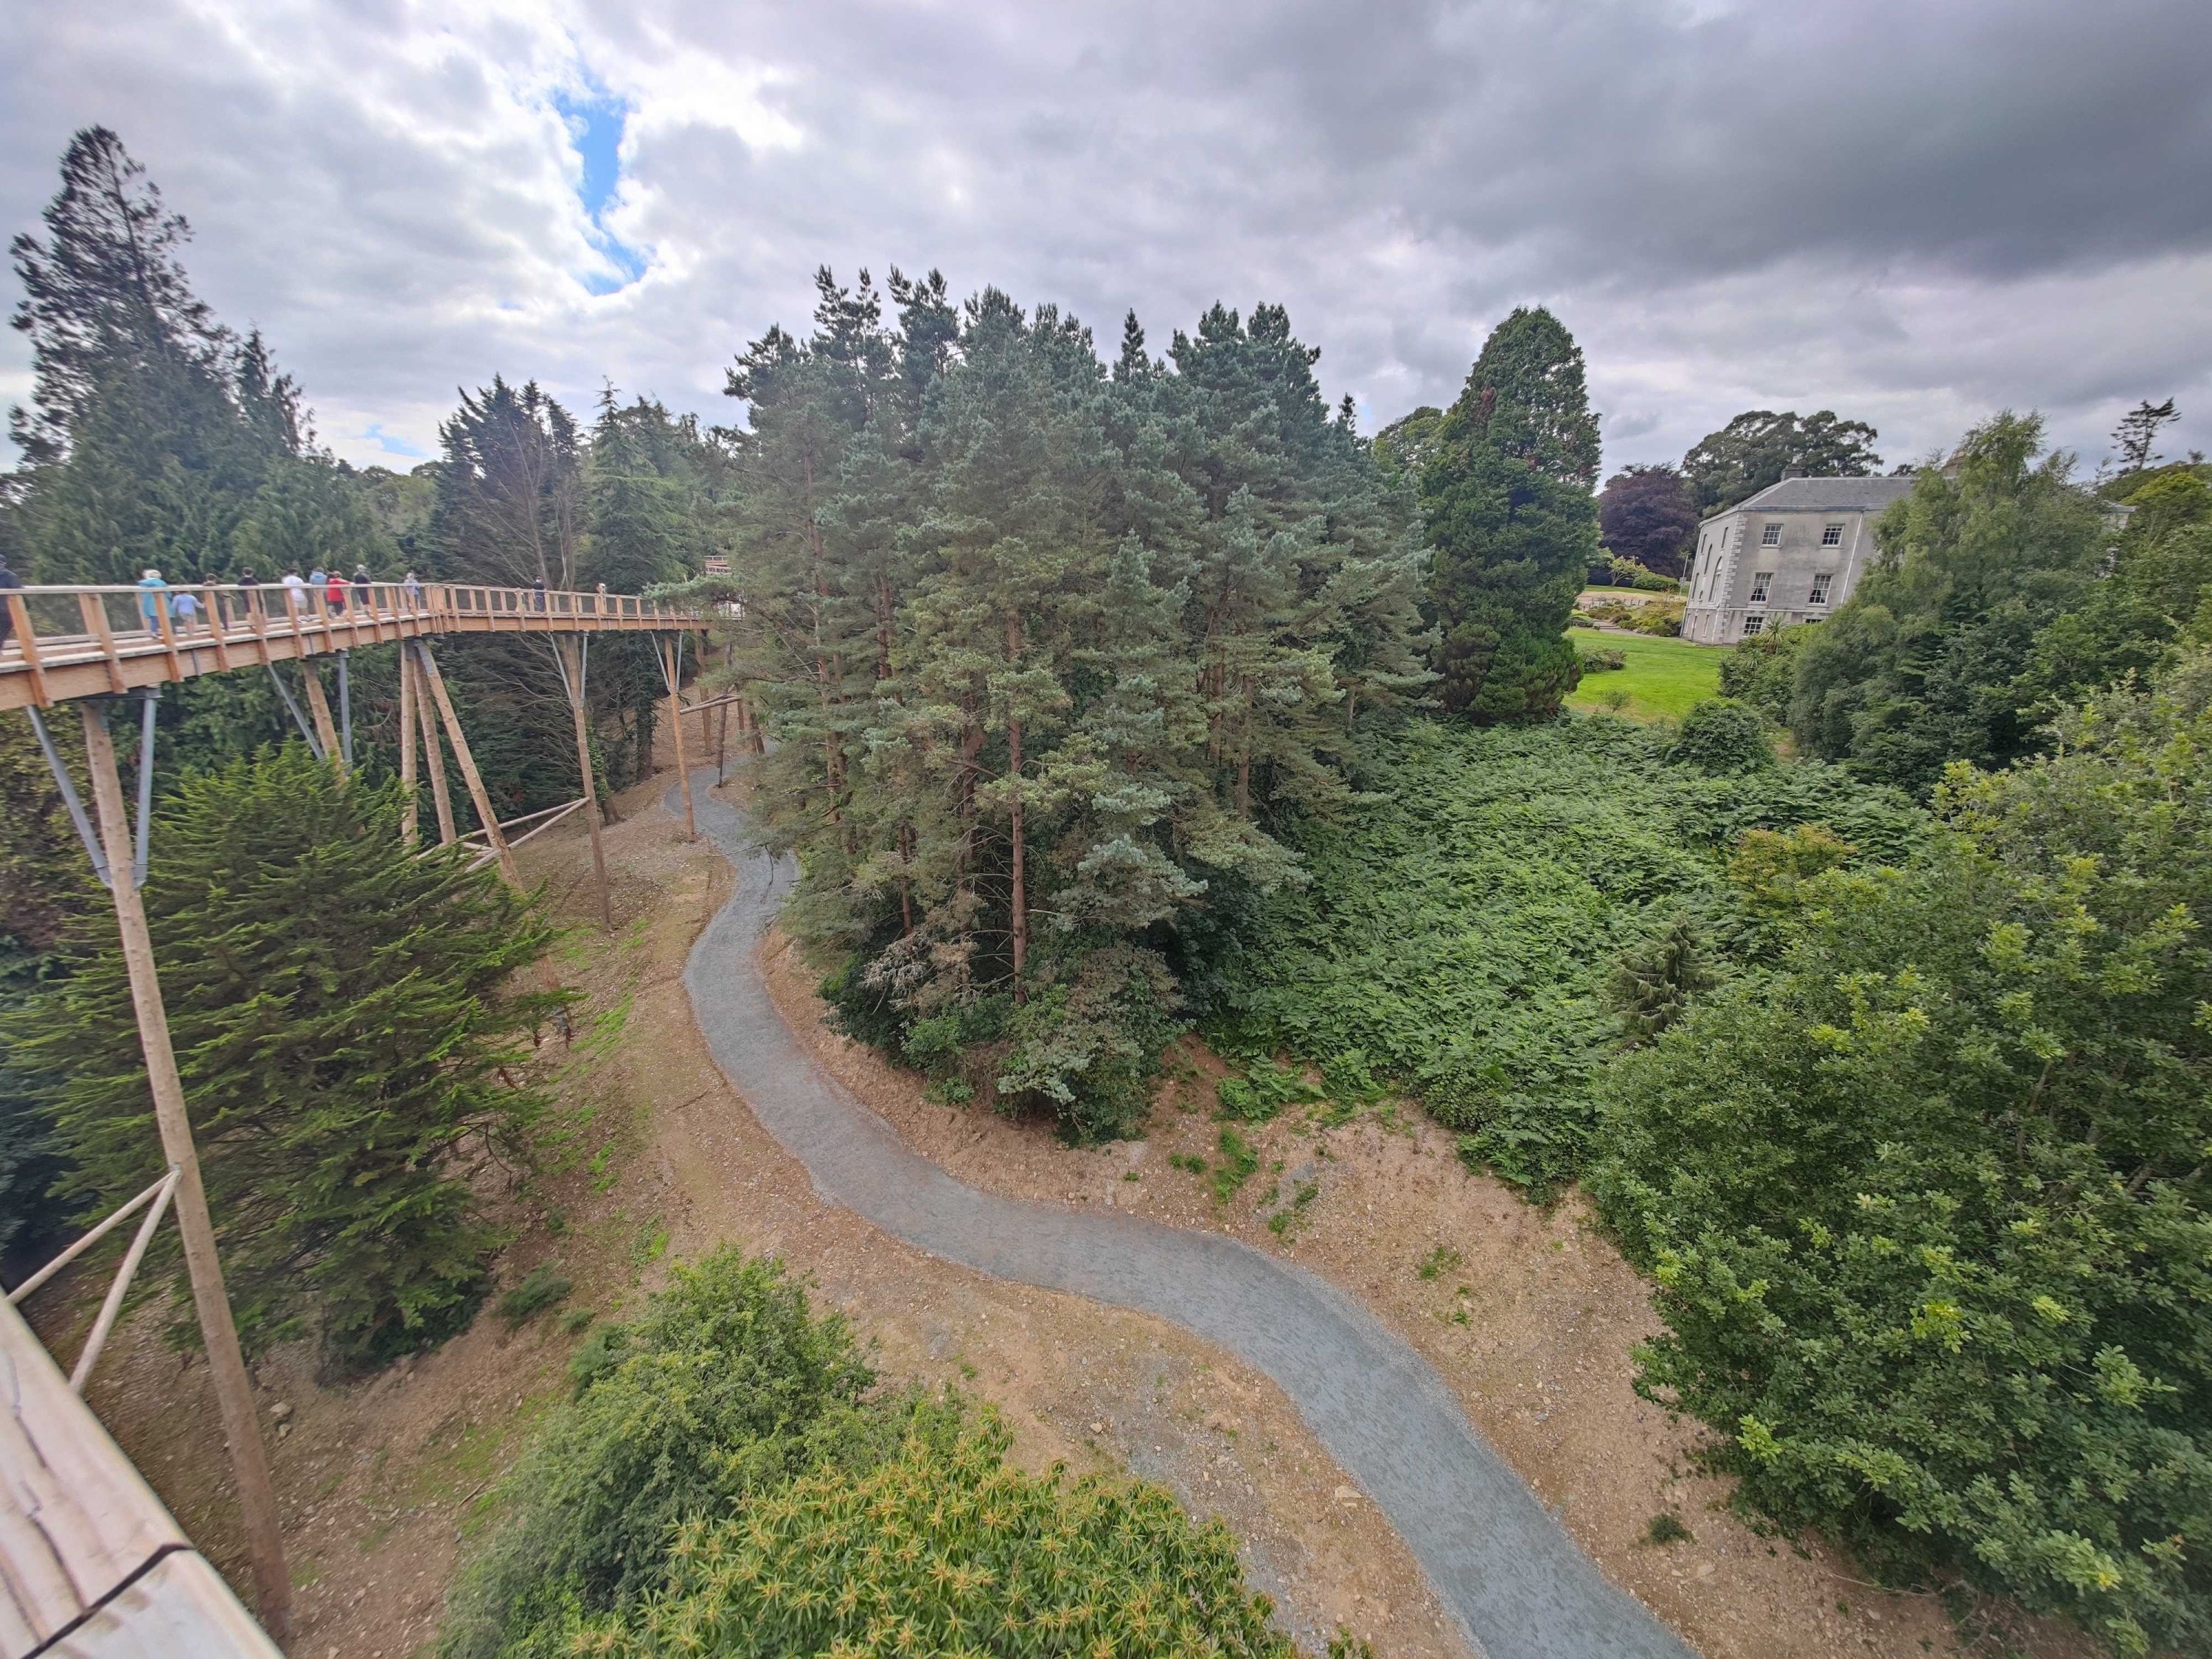 Ireland's new treetop walk takes visitors over a forest park by the Wicklow Mountains and is fast becoming a major tourist landmark for Dublin visitors. (dpa Photo)